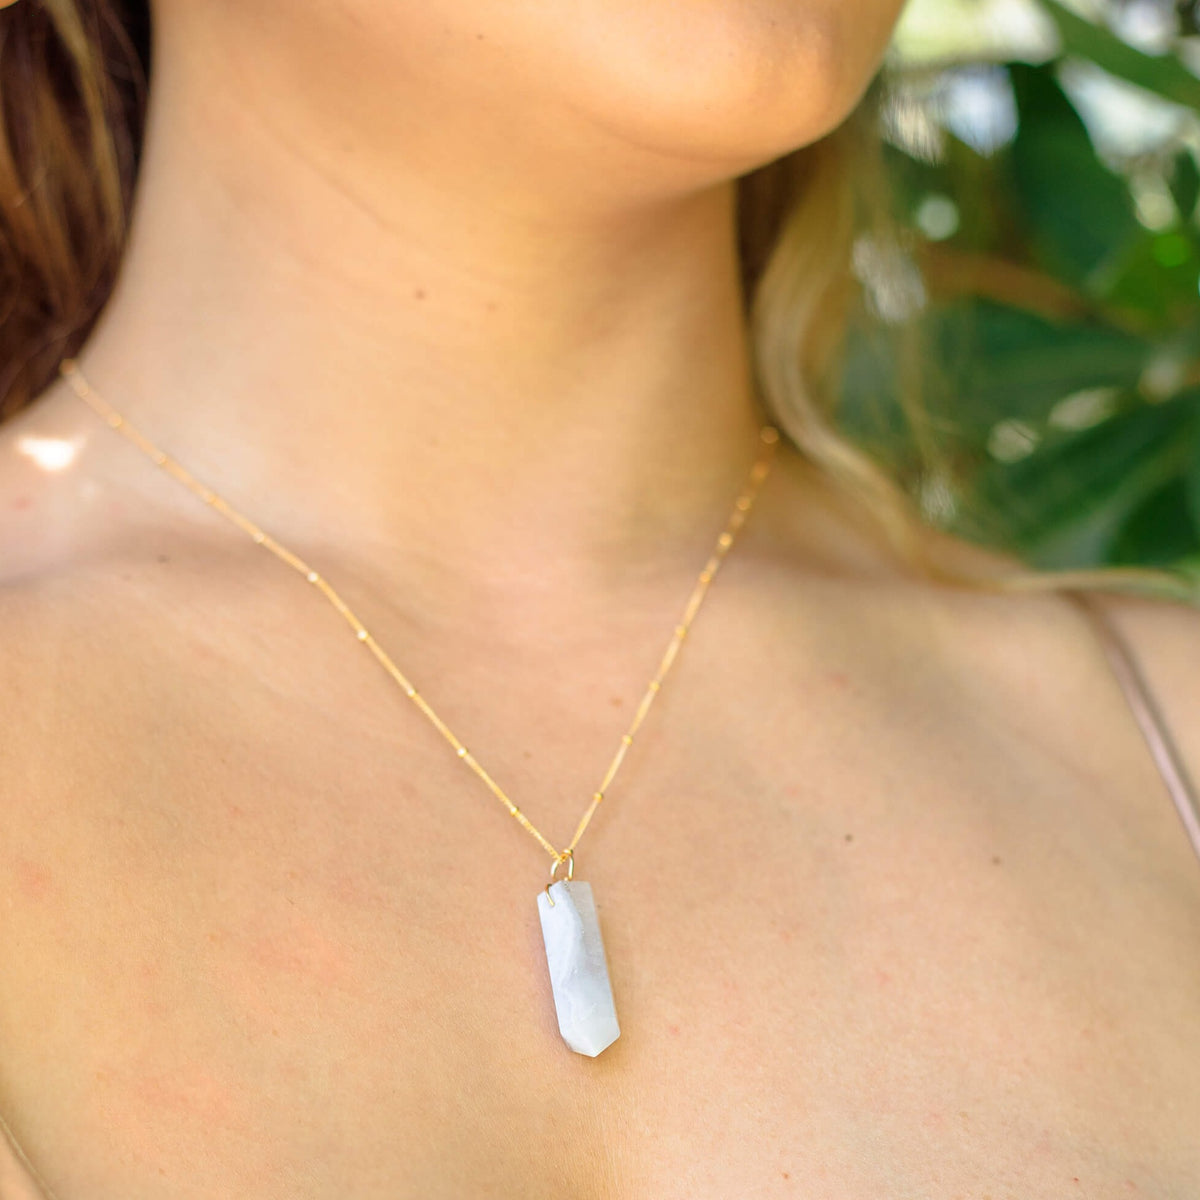 Large Crystal Point Necklace - Blue Lace Agate - 14K Gold Fill Satellite - Luna Tide Handmade Jewellery